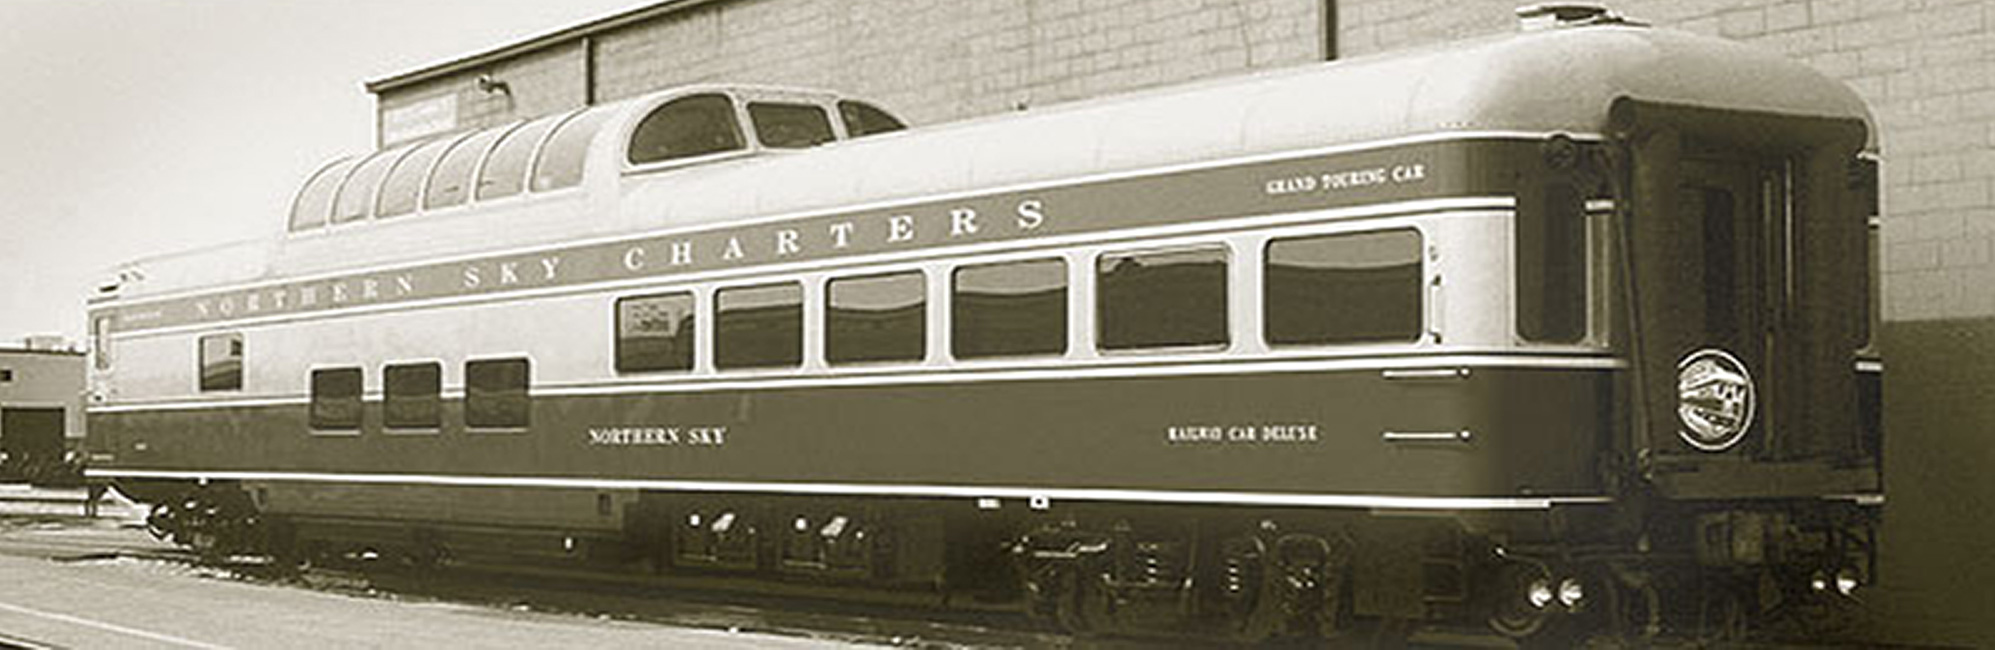 History of Northern Sky & Northern Dreams Rail Charters